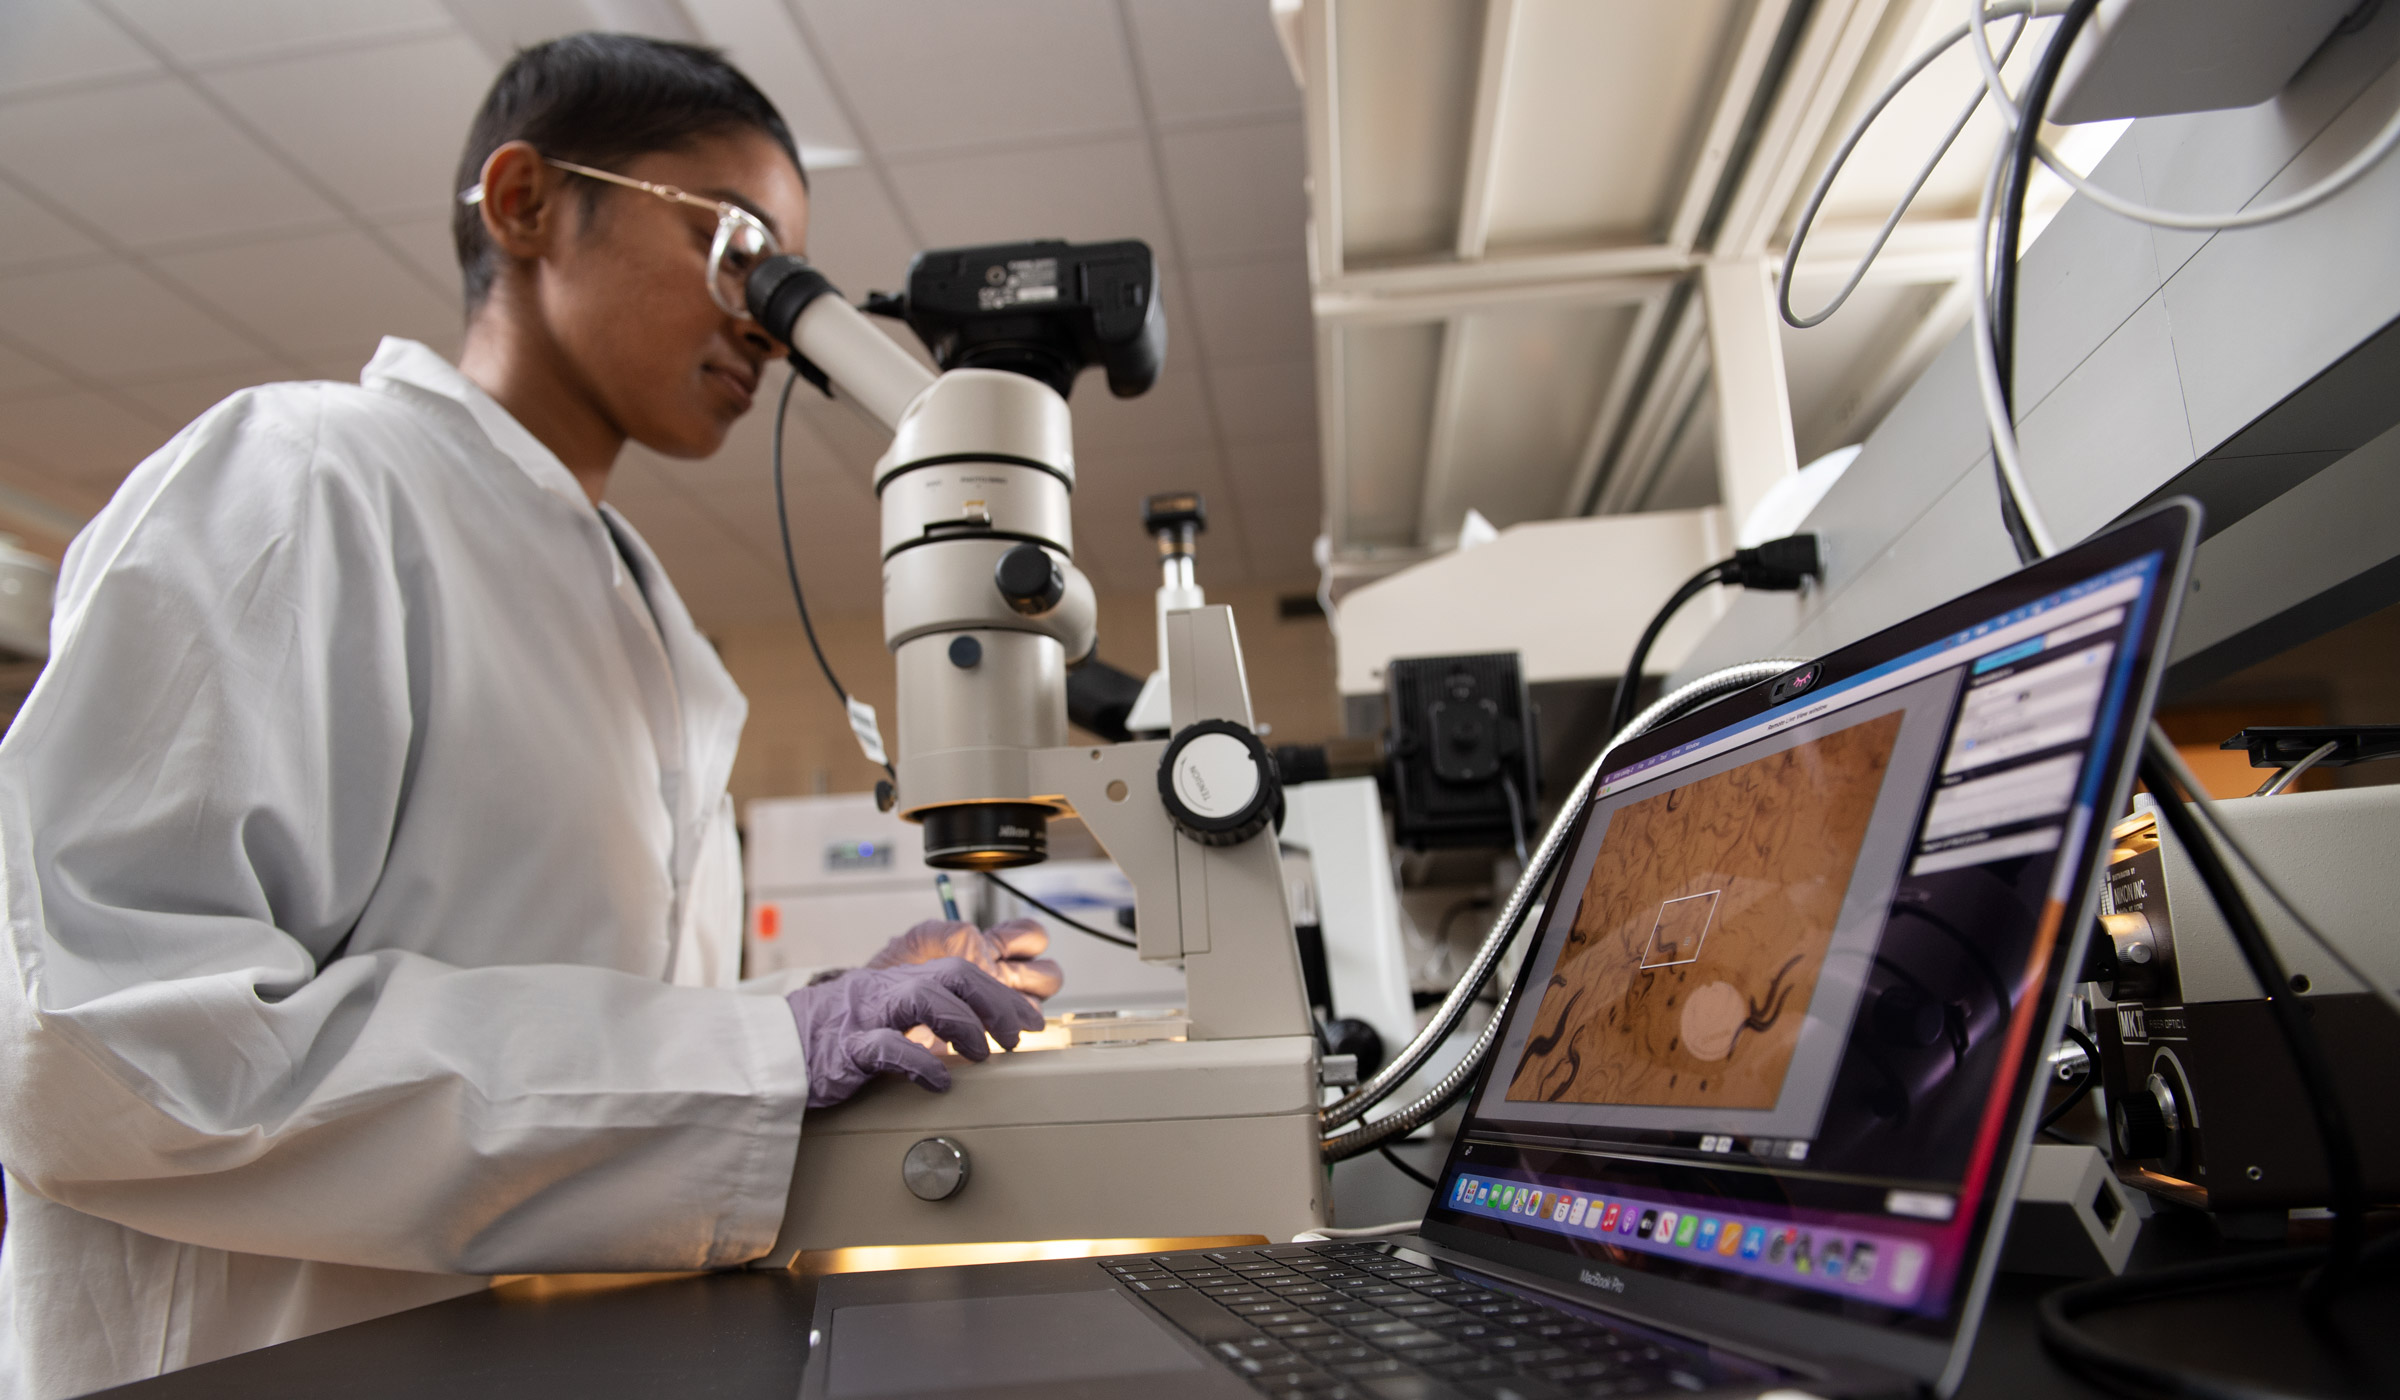 Graduate student Dharani Matharage looks into a microscope in a lab, with the nematodes she&#039;s looking at on the screen of a laptop in the foreground.